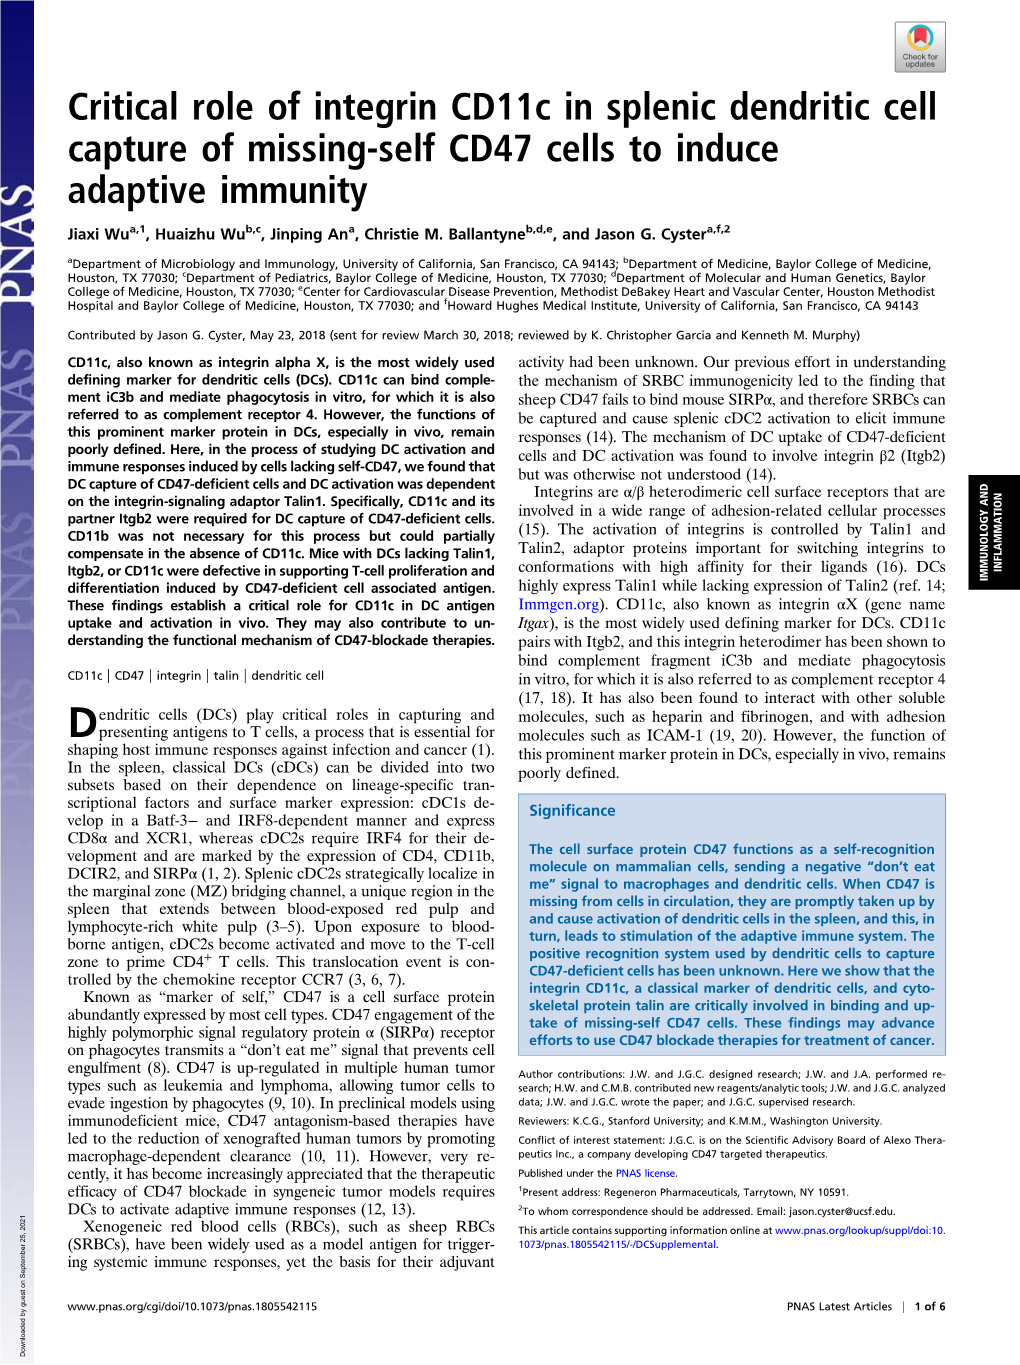 Critical Role of Integrin Cd11c in Splenic Dendritic Cell Capture of Missing-Self CD47 Cells to Induce Adaptive Immunity